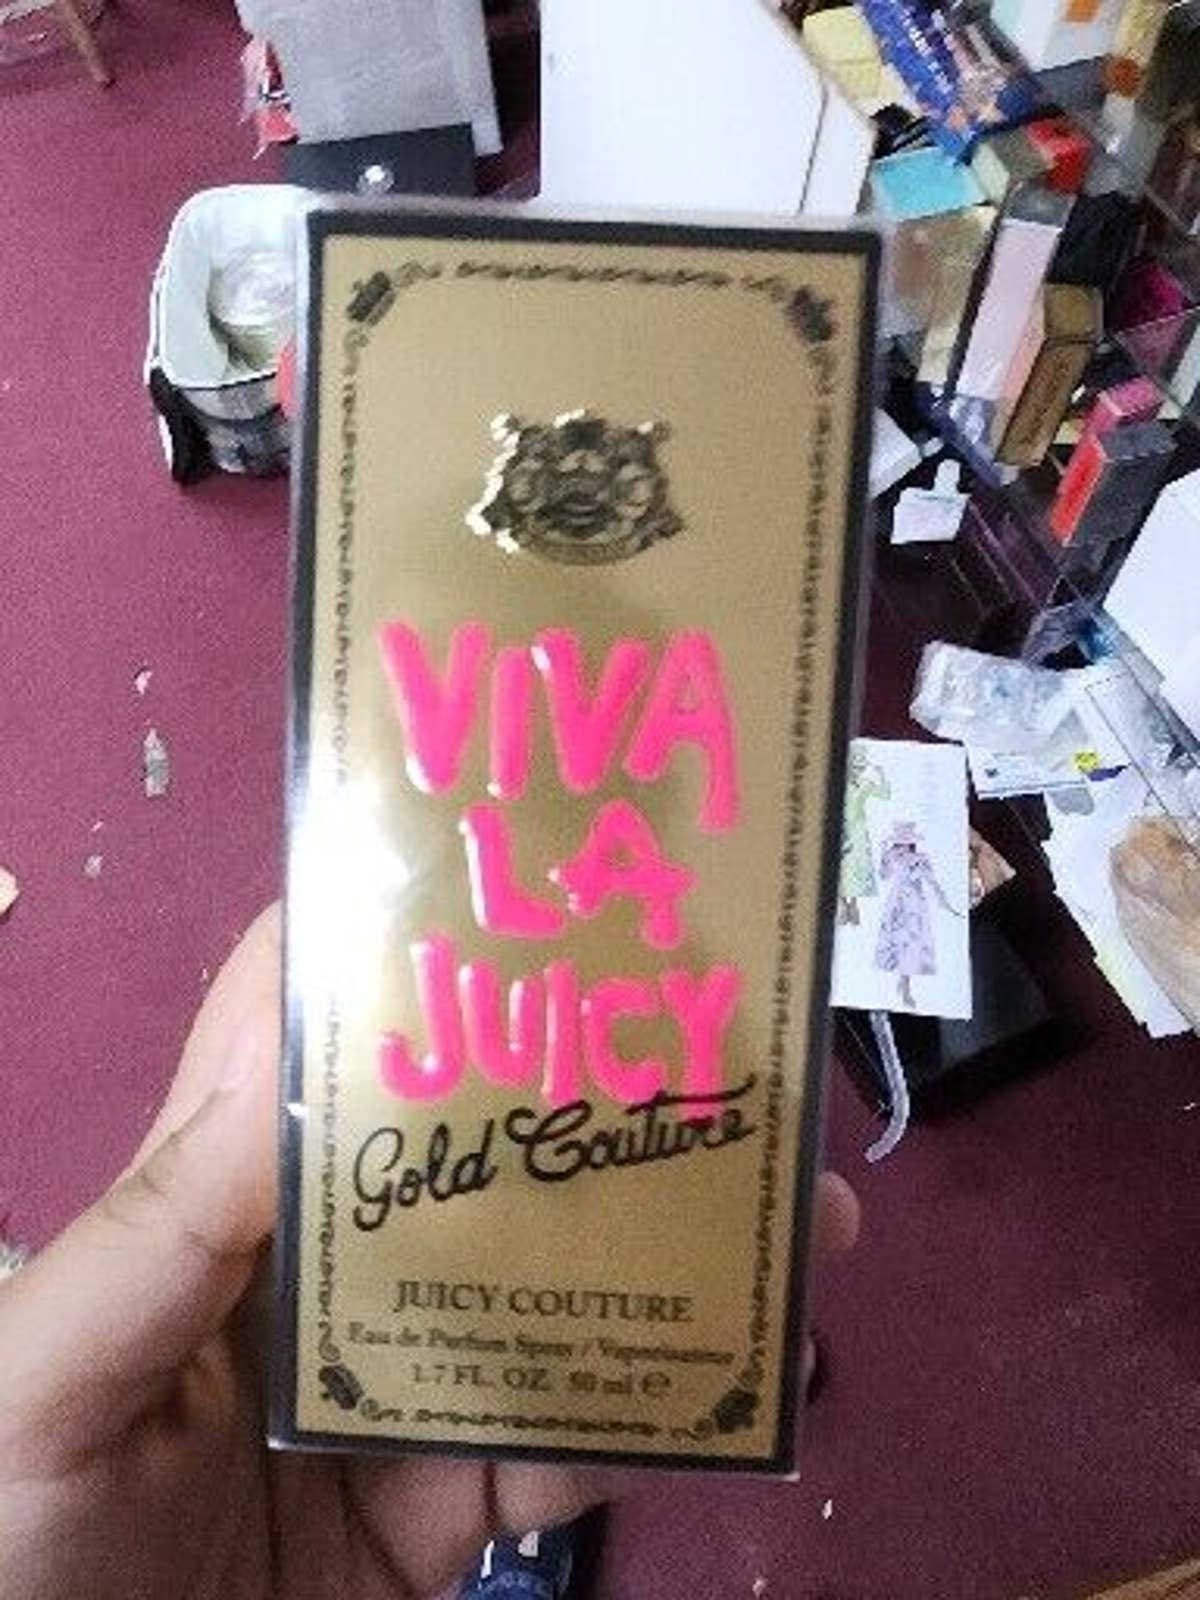 Juicy Couture Boxed Journal Pen Set - Princess of Everything, Pink & Gold  Glitter, w/ Pen & Stickers